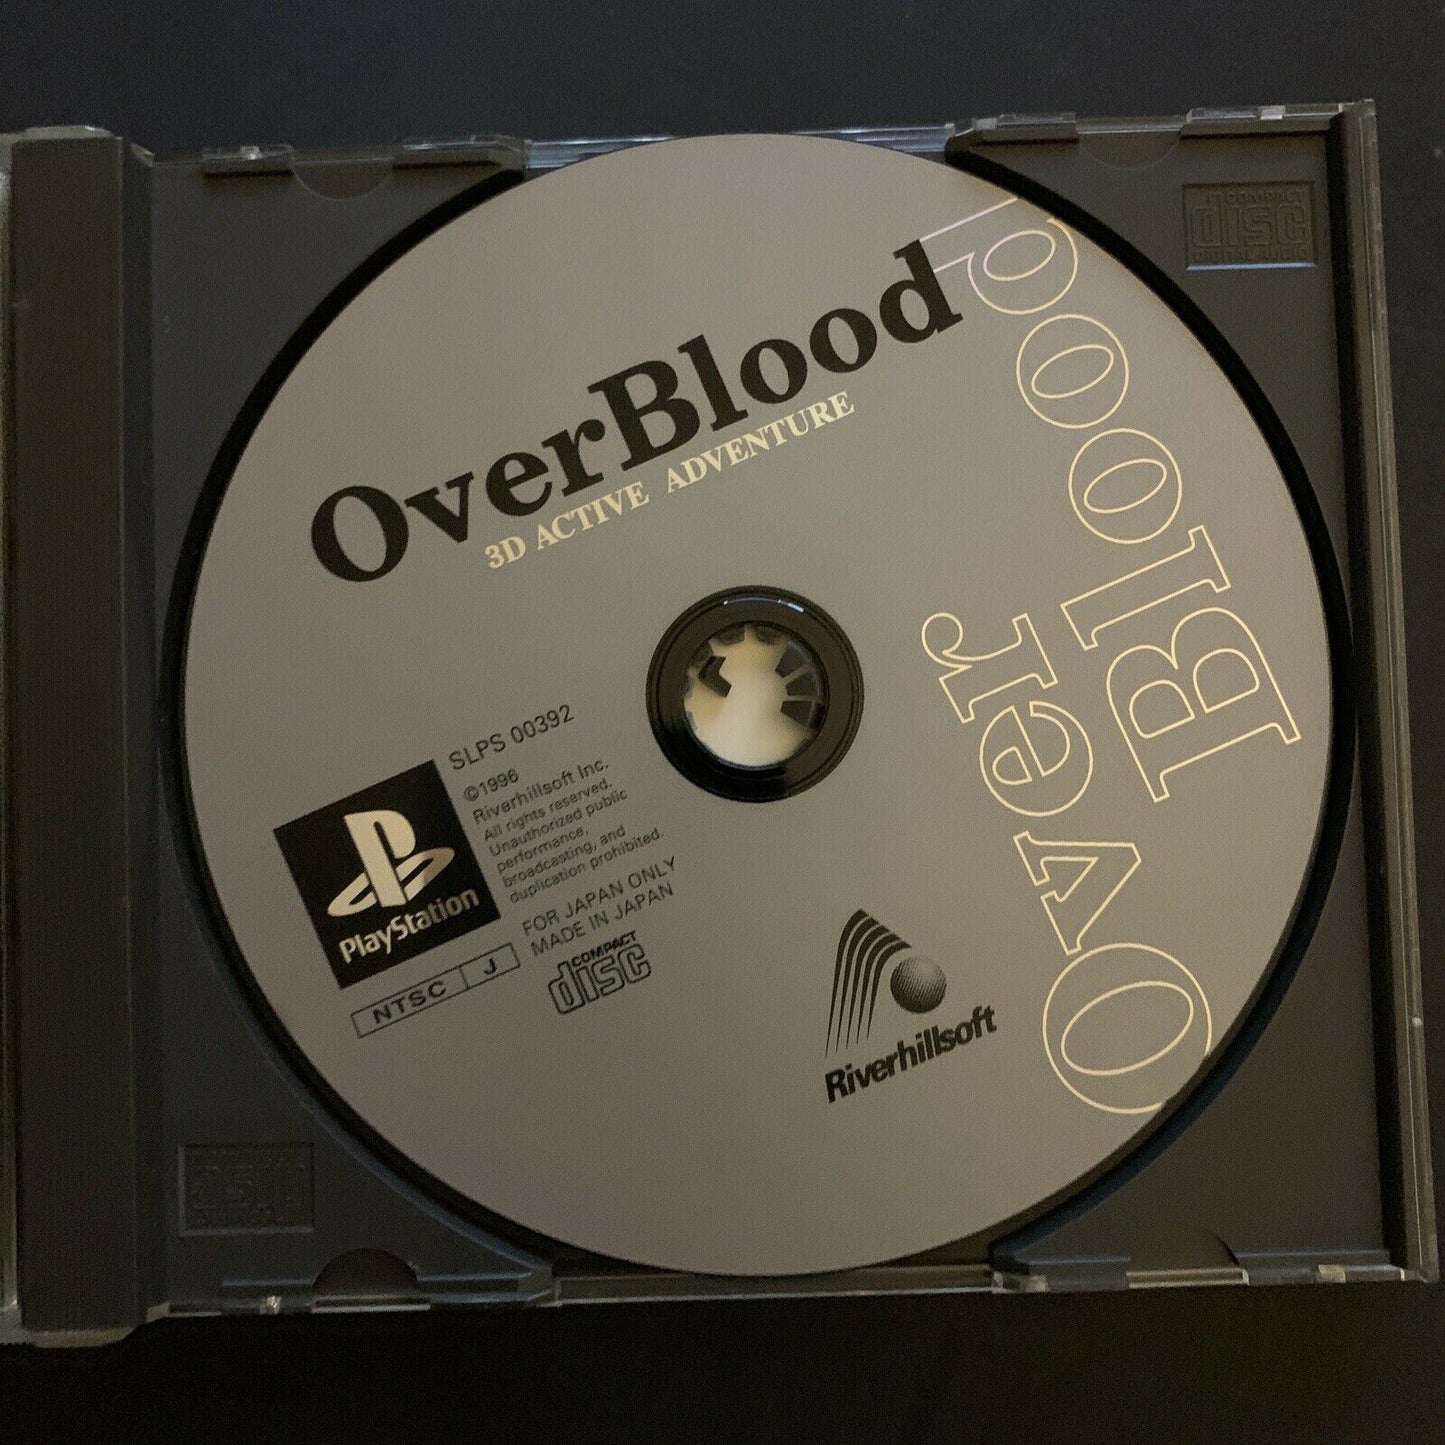 Over Blood - A 3D Active Adventure - Sony PlayStation 1 PS1 NTSC-J Japan Game